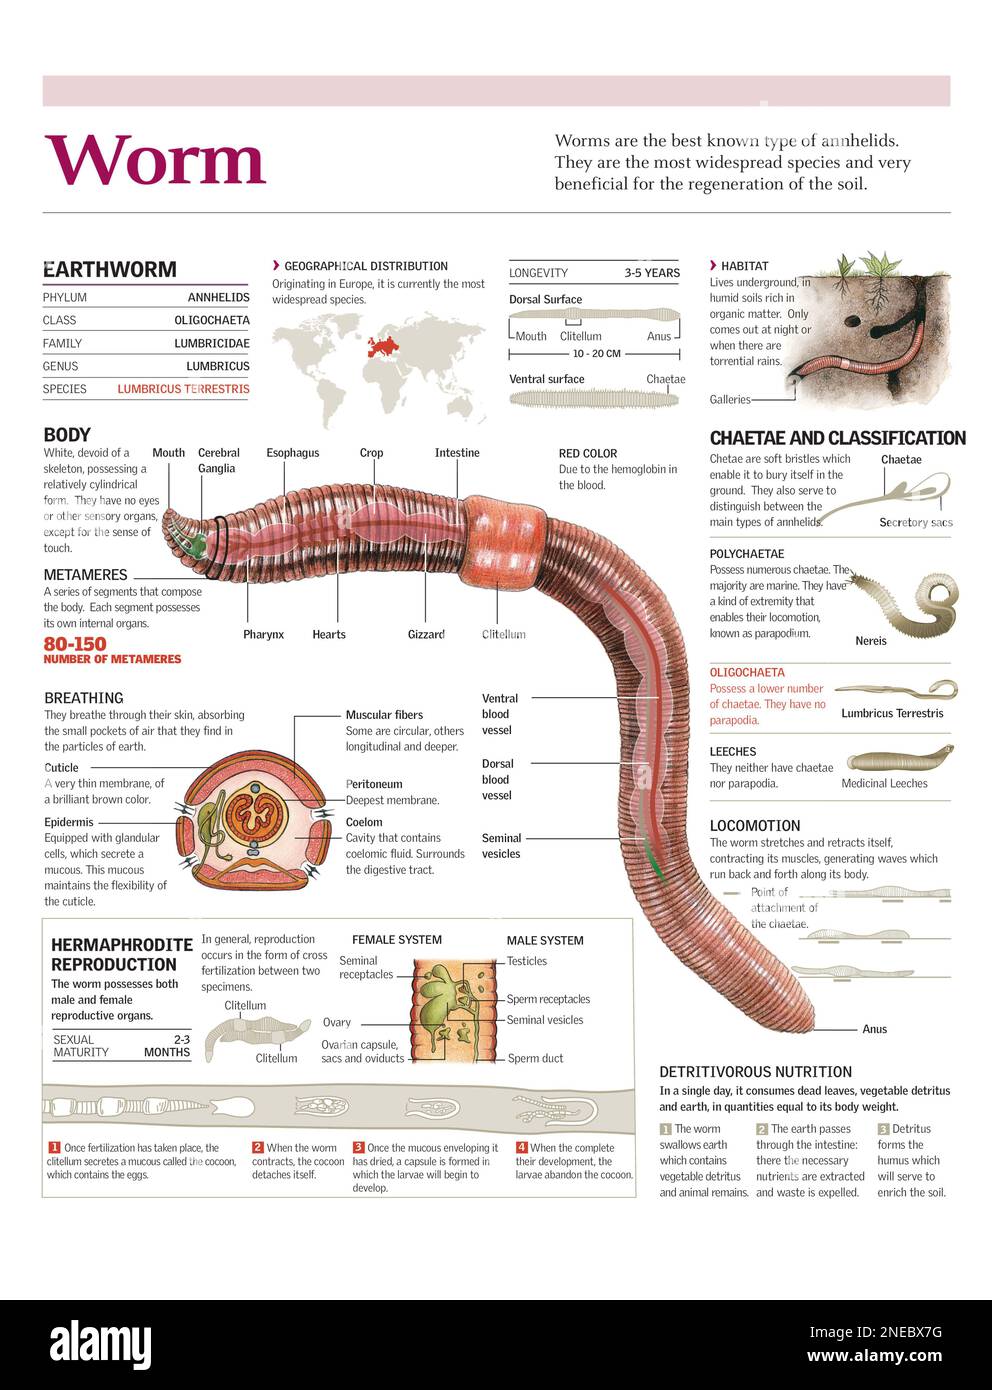 Infographicsof the anatomy, habitat and reproduction of the